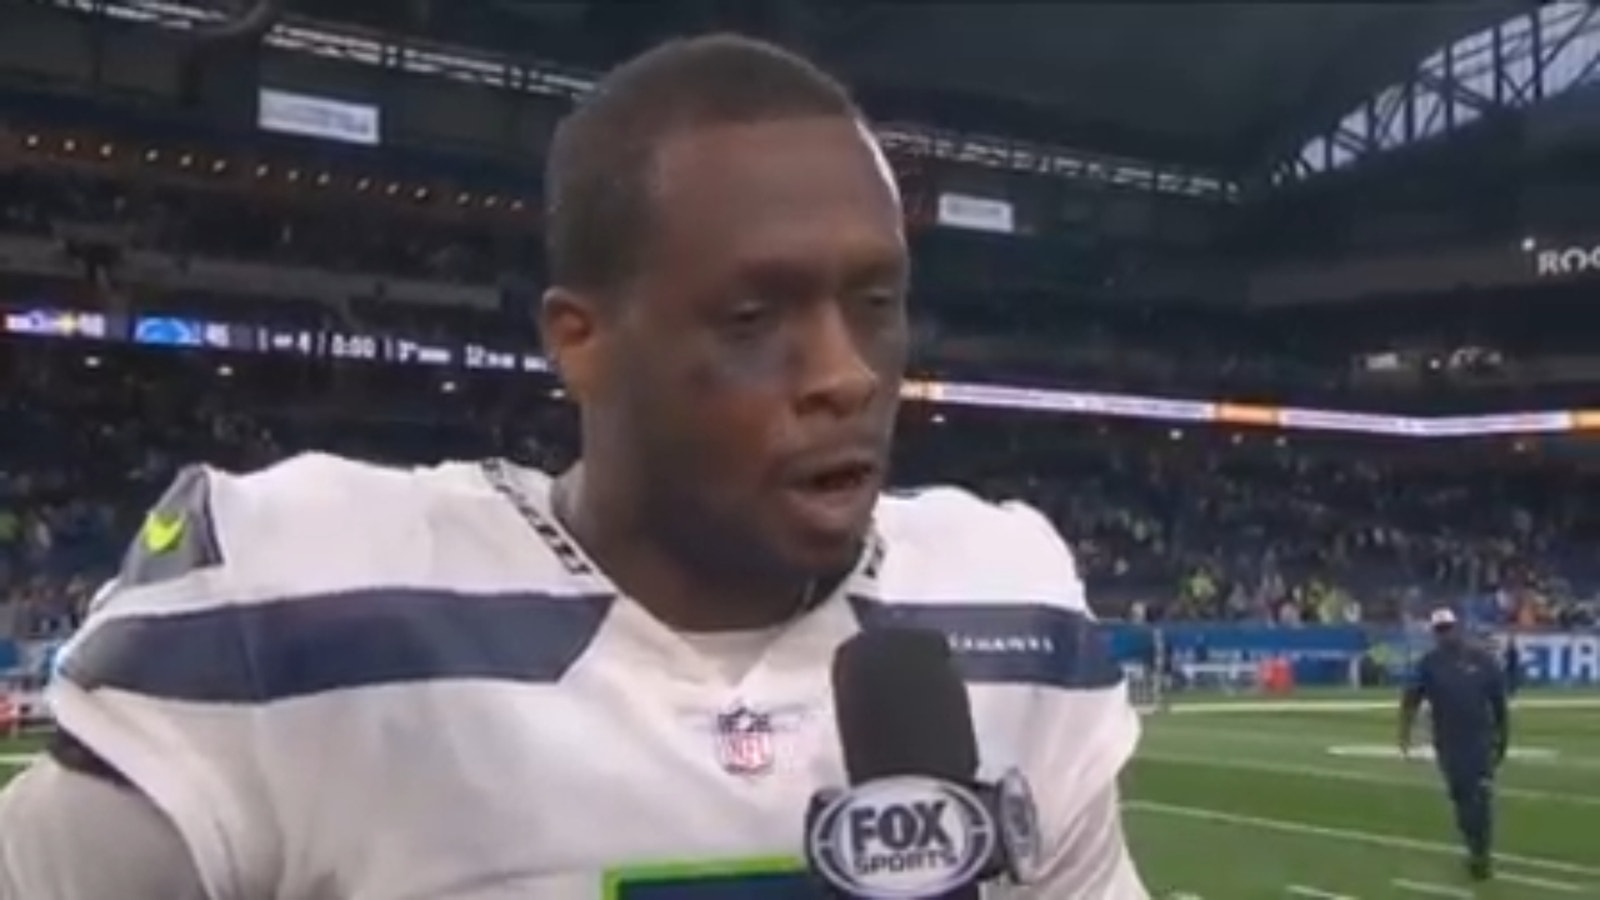 "Today we got it done" — Geno Smith on 48-45 win over Lions